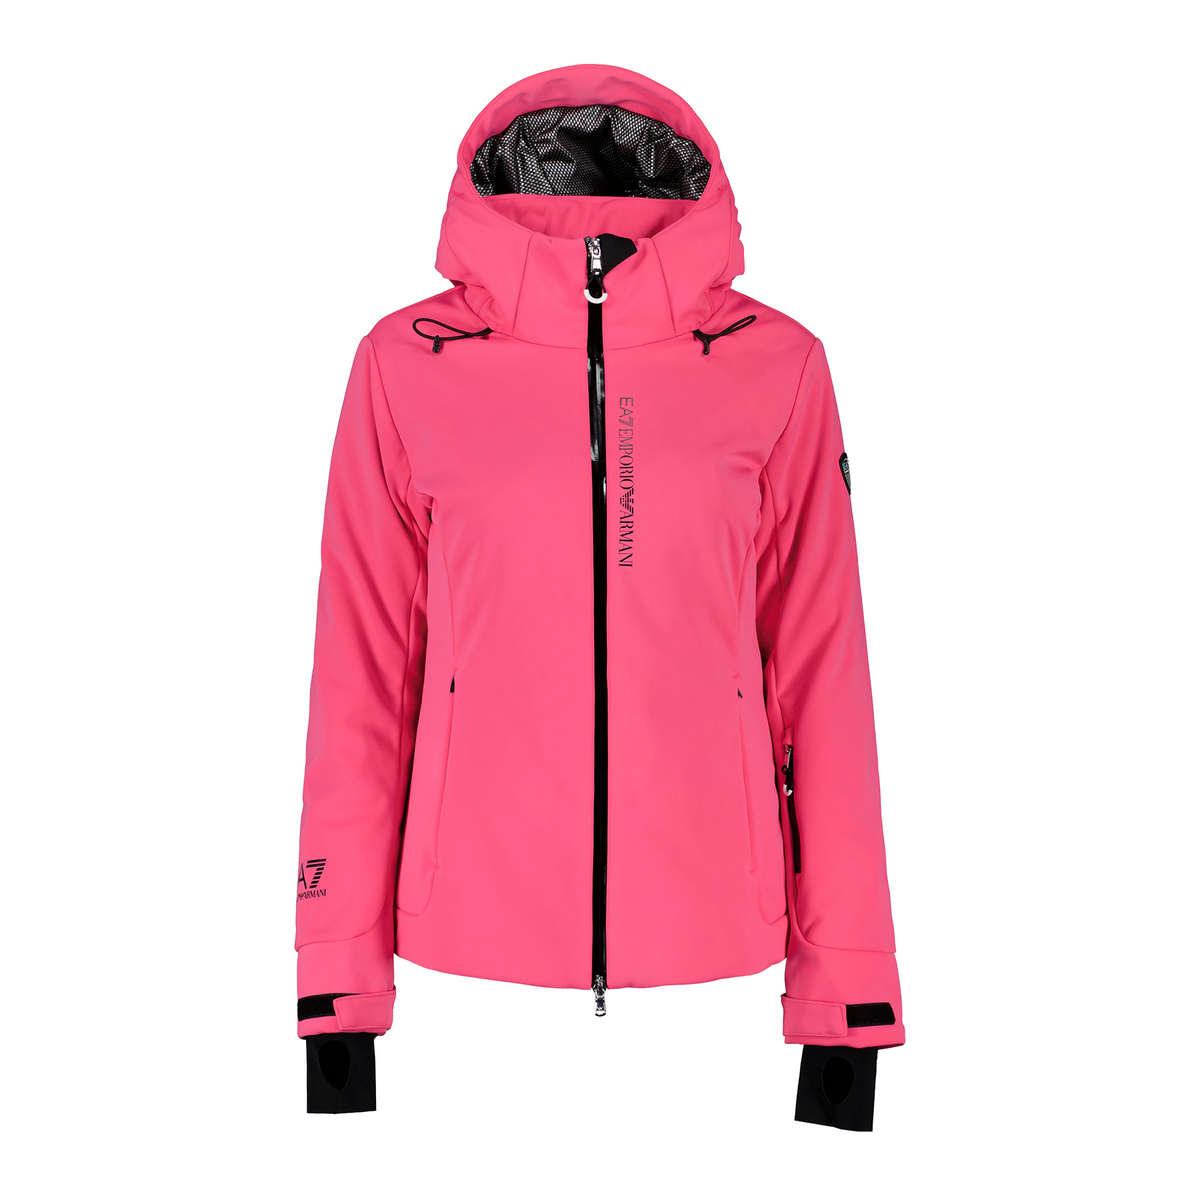 COMPLETO TRIS SOFTSHELL DONNA